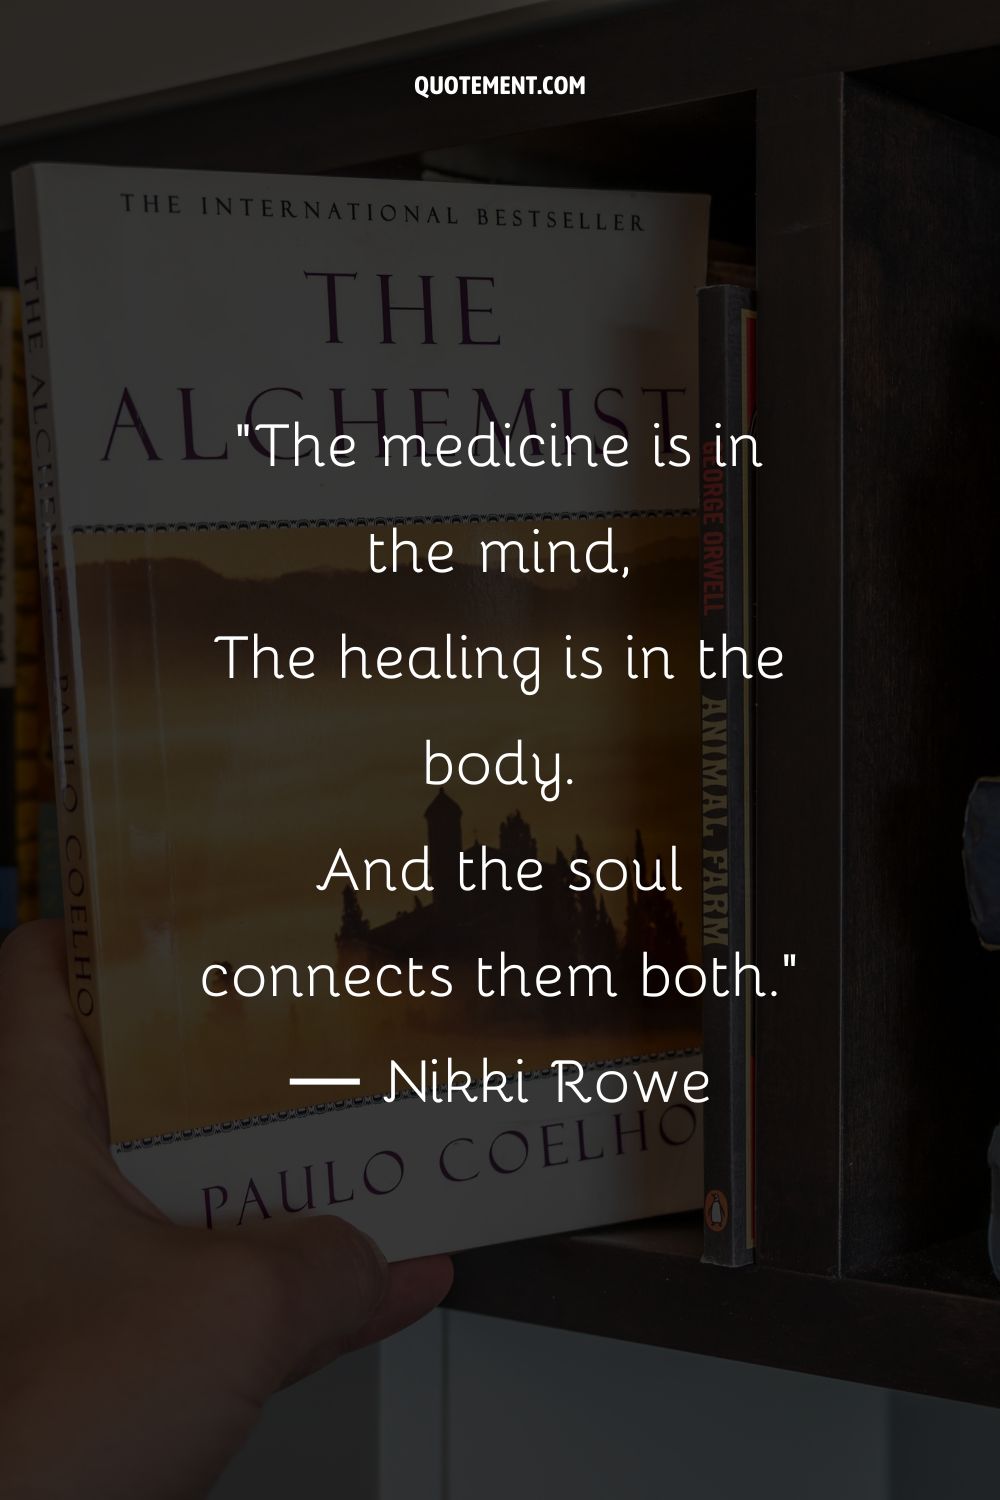 The medicine is in the mind,